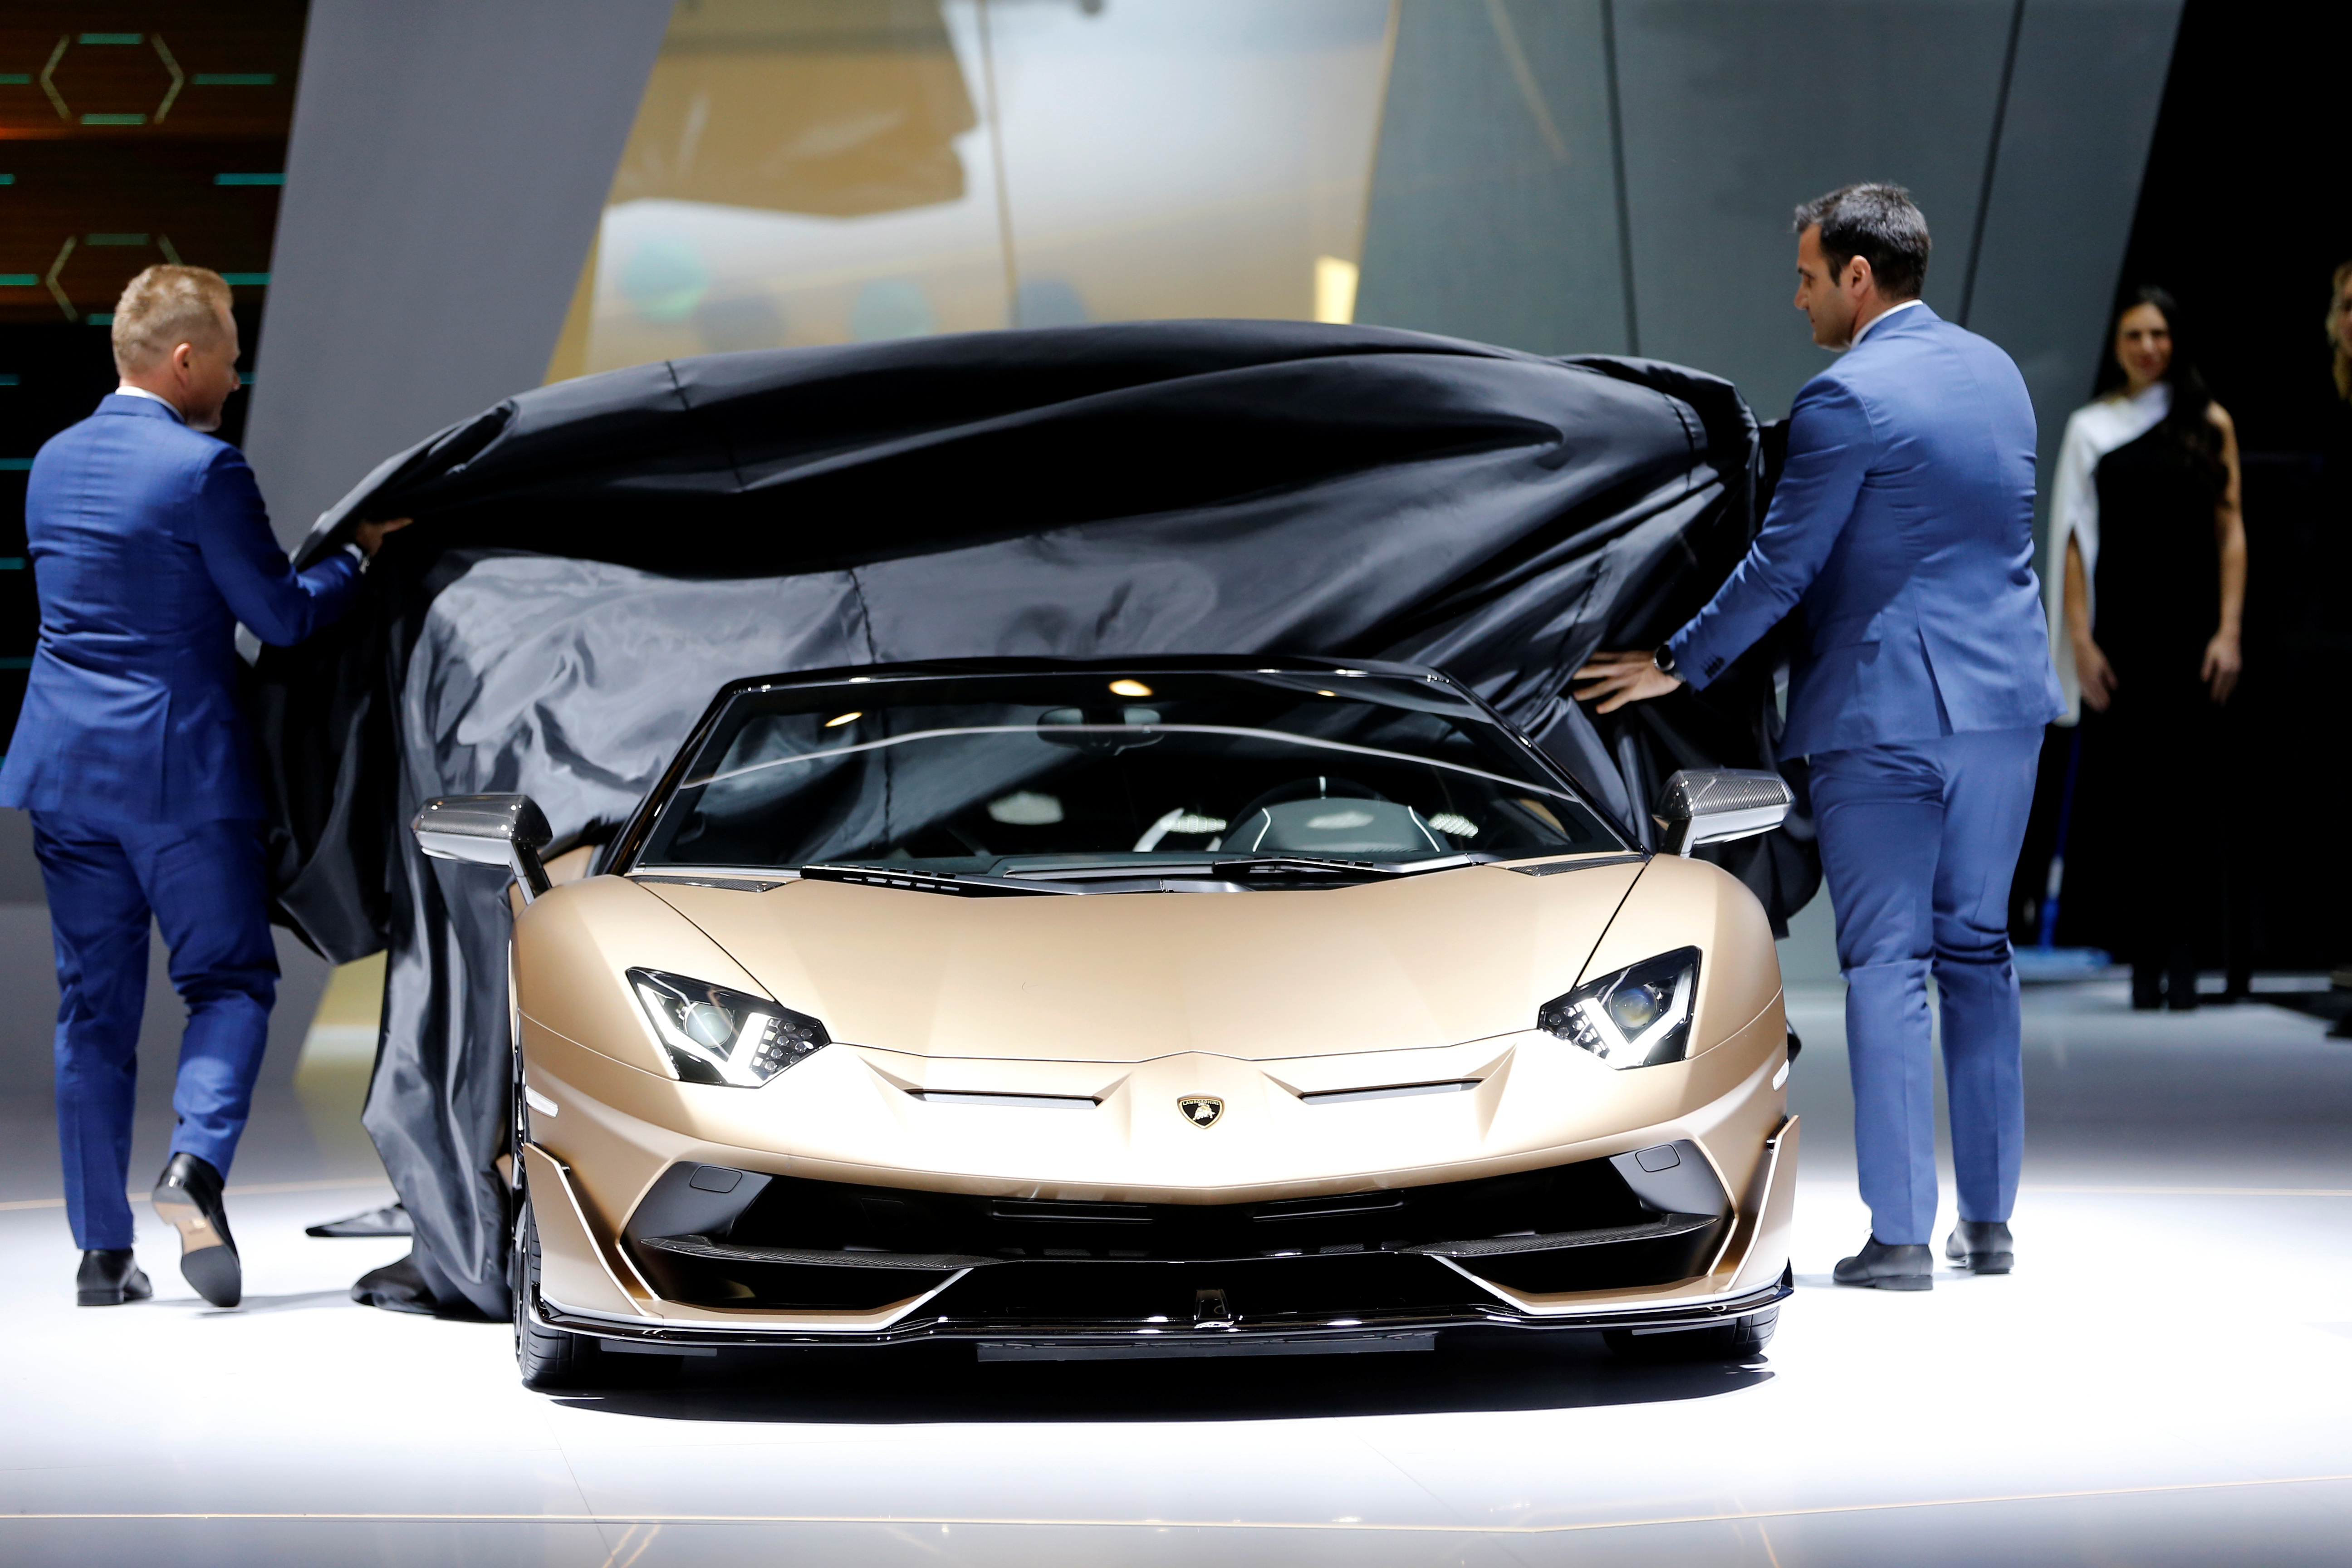 Lamborghini wants to continue manufacturing gas-powered cars into the 2030s thumbnail